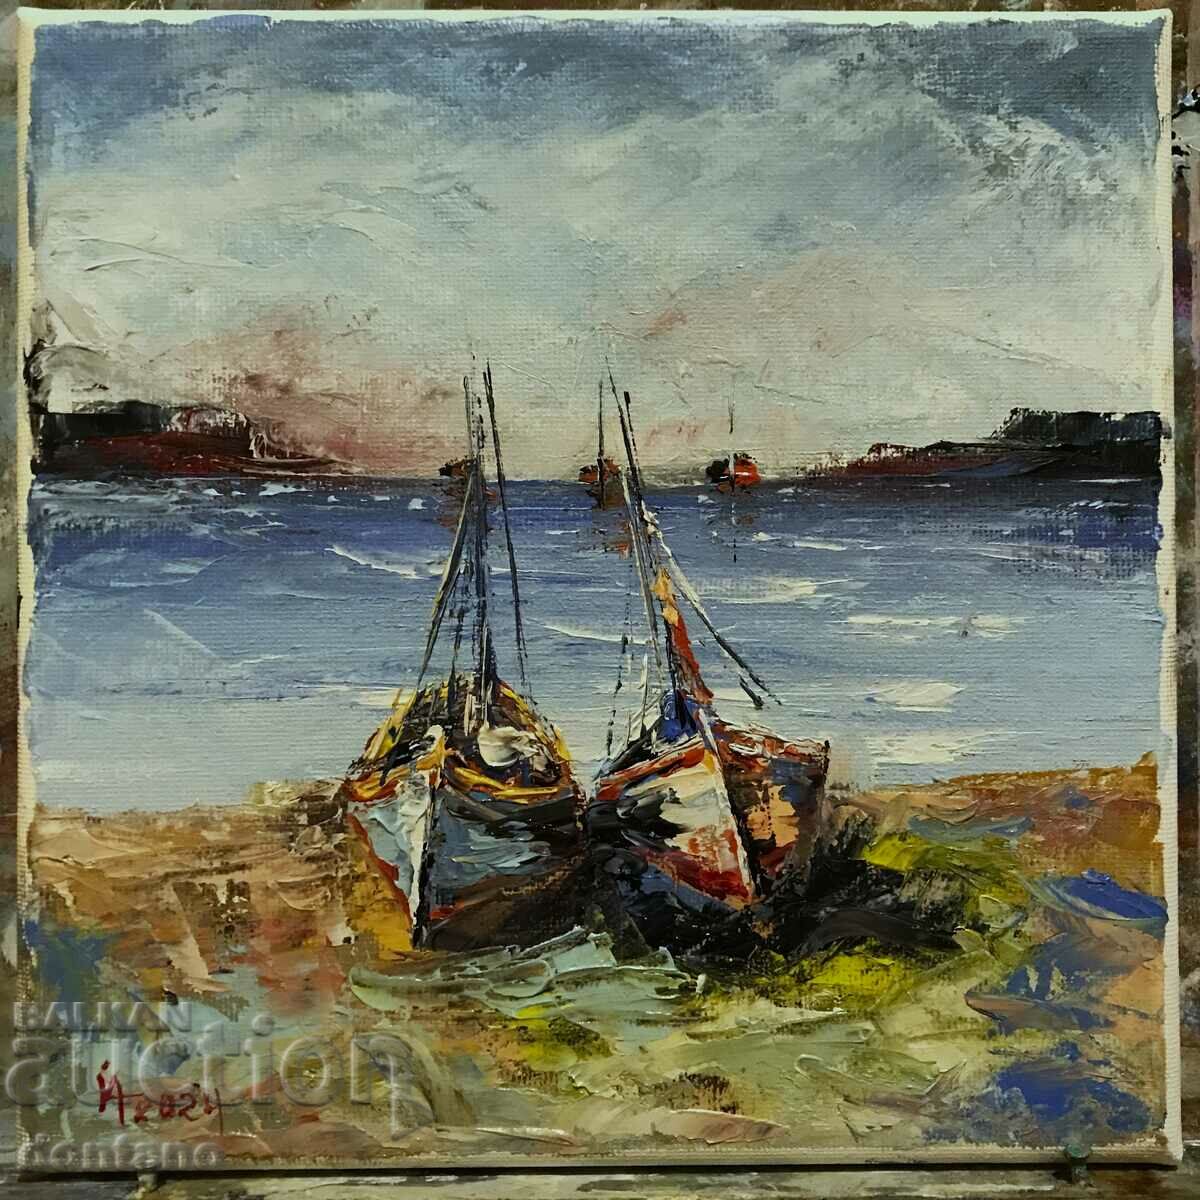 Oil painting - Seascape - Boats on the shore - Sozopol